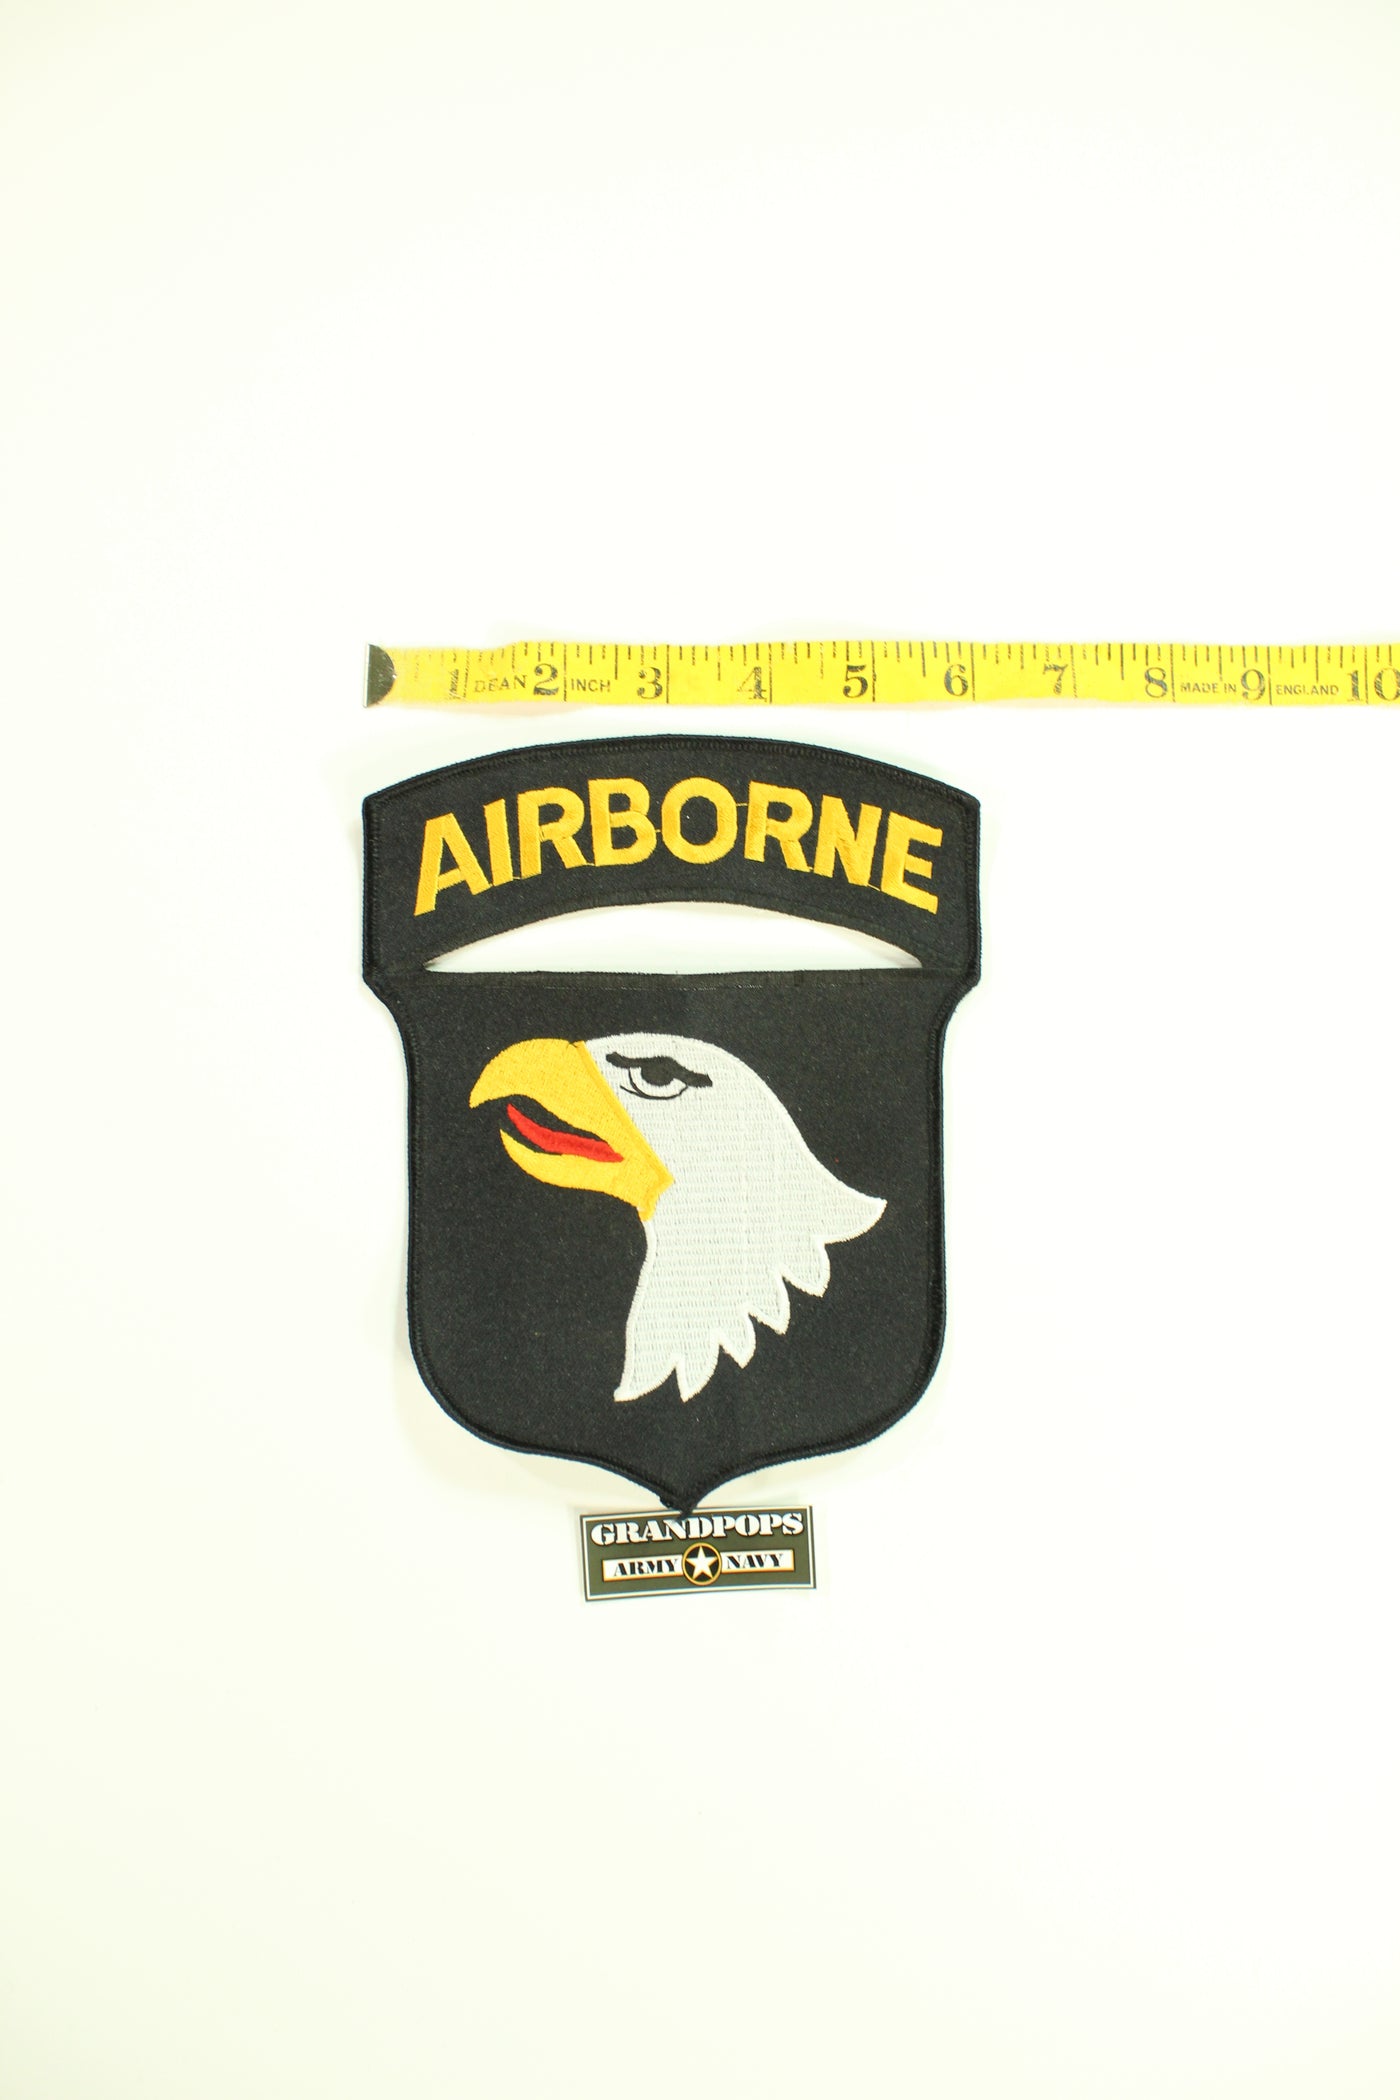 Soaring Eagle Patch, Large Eagle Back Patches